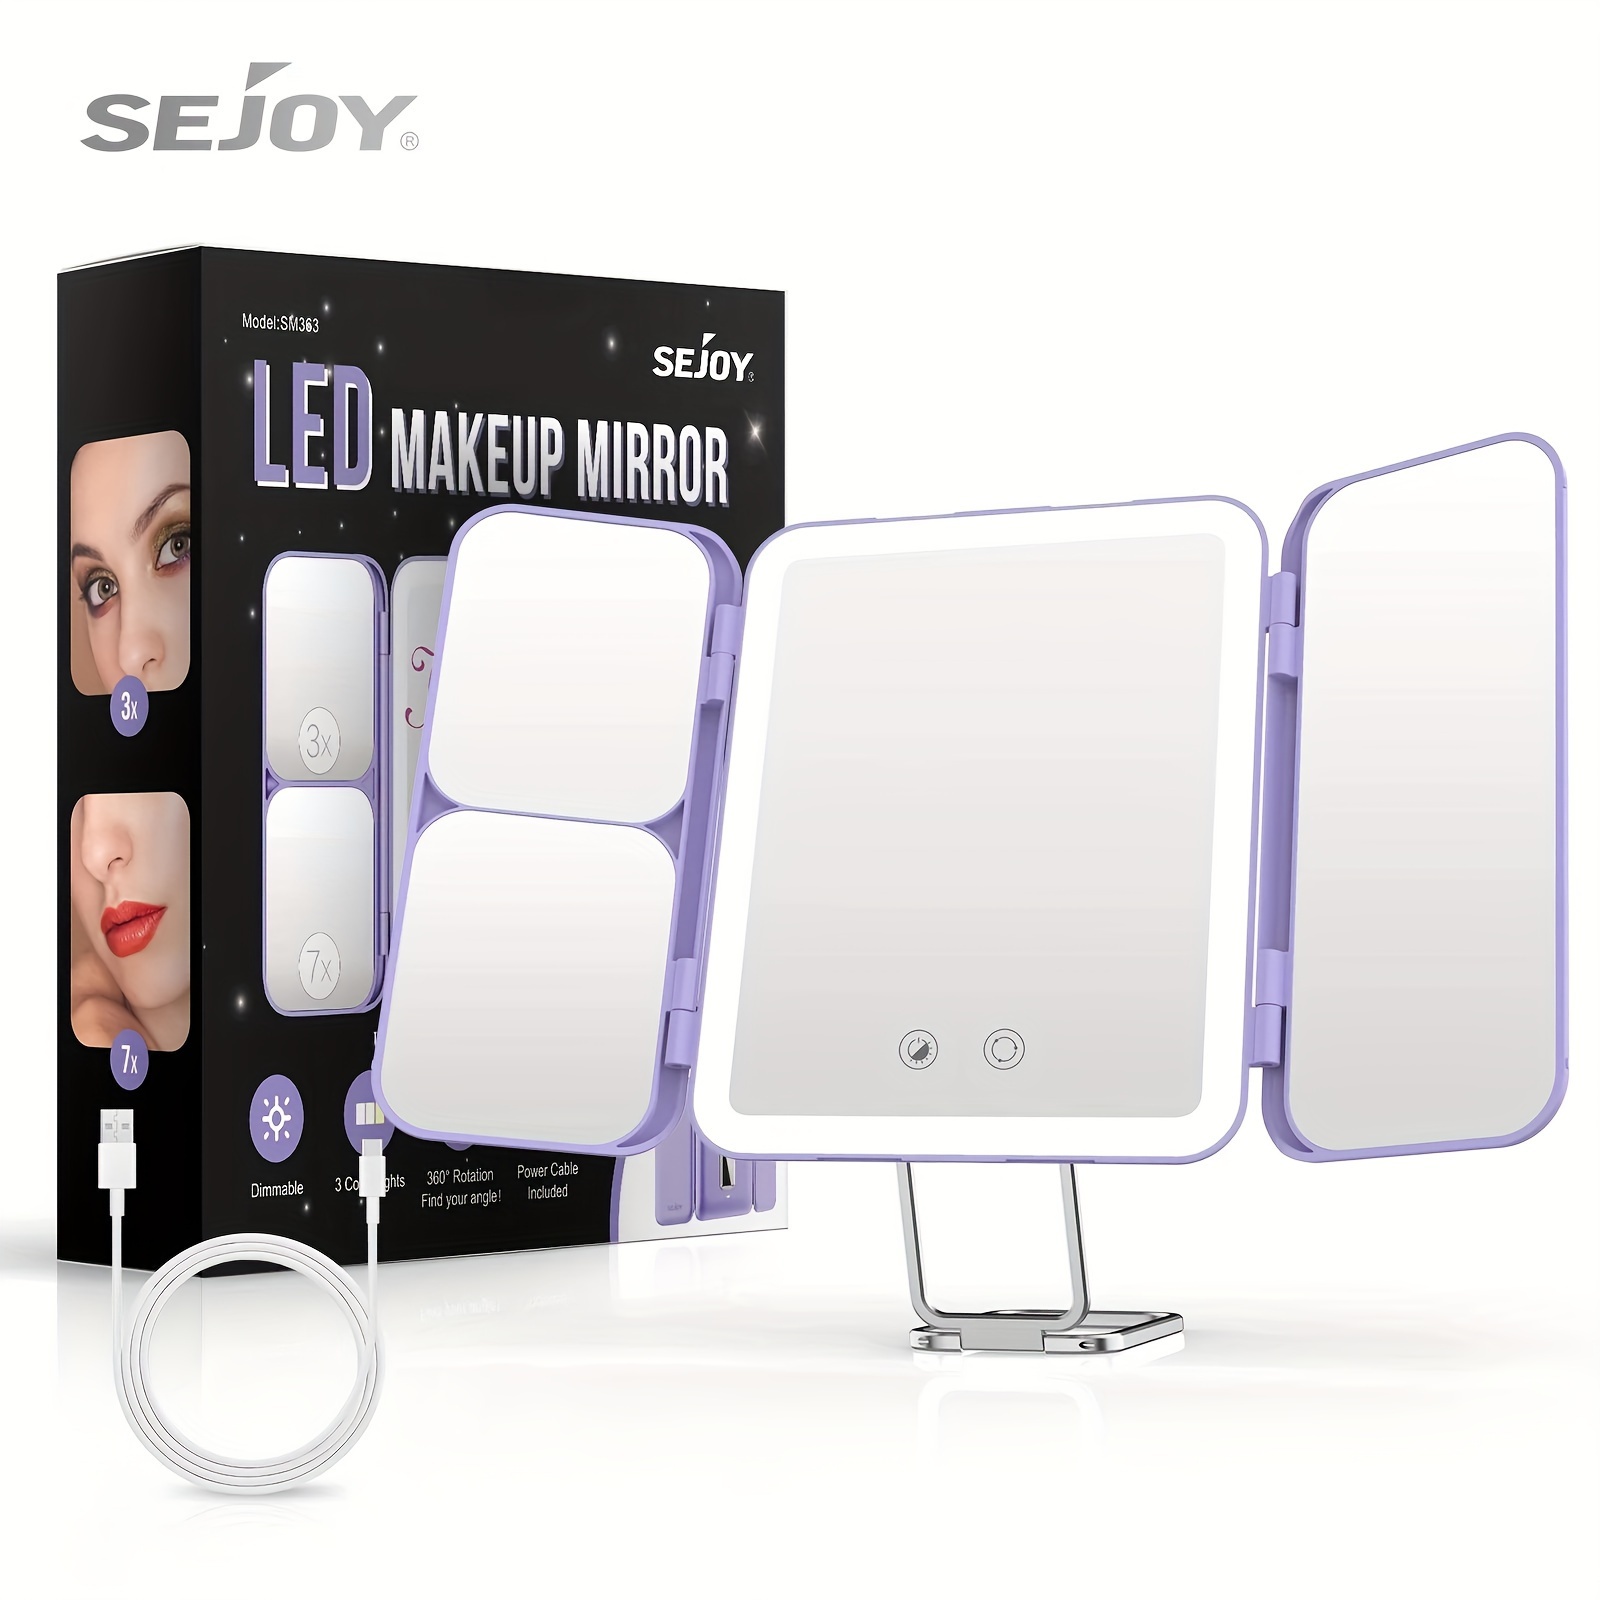 

Makeup Mirror With 3 Color Lights, Tri-fold Vanity Mirror With 3x 7x Magnifying Mirror, Portable Travel Mirror, Gift For Women, Desktop/wall Mount, Touch Sensor Rechargeable Smart Dimming